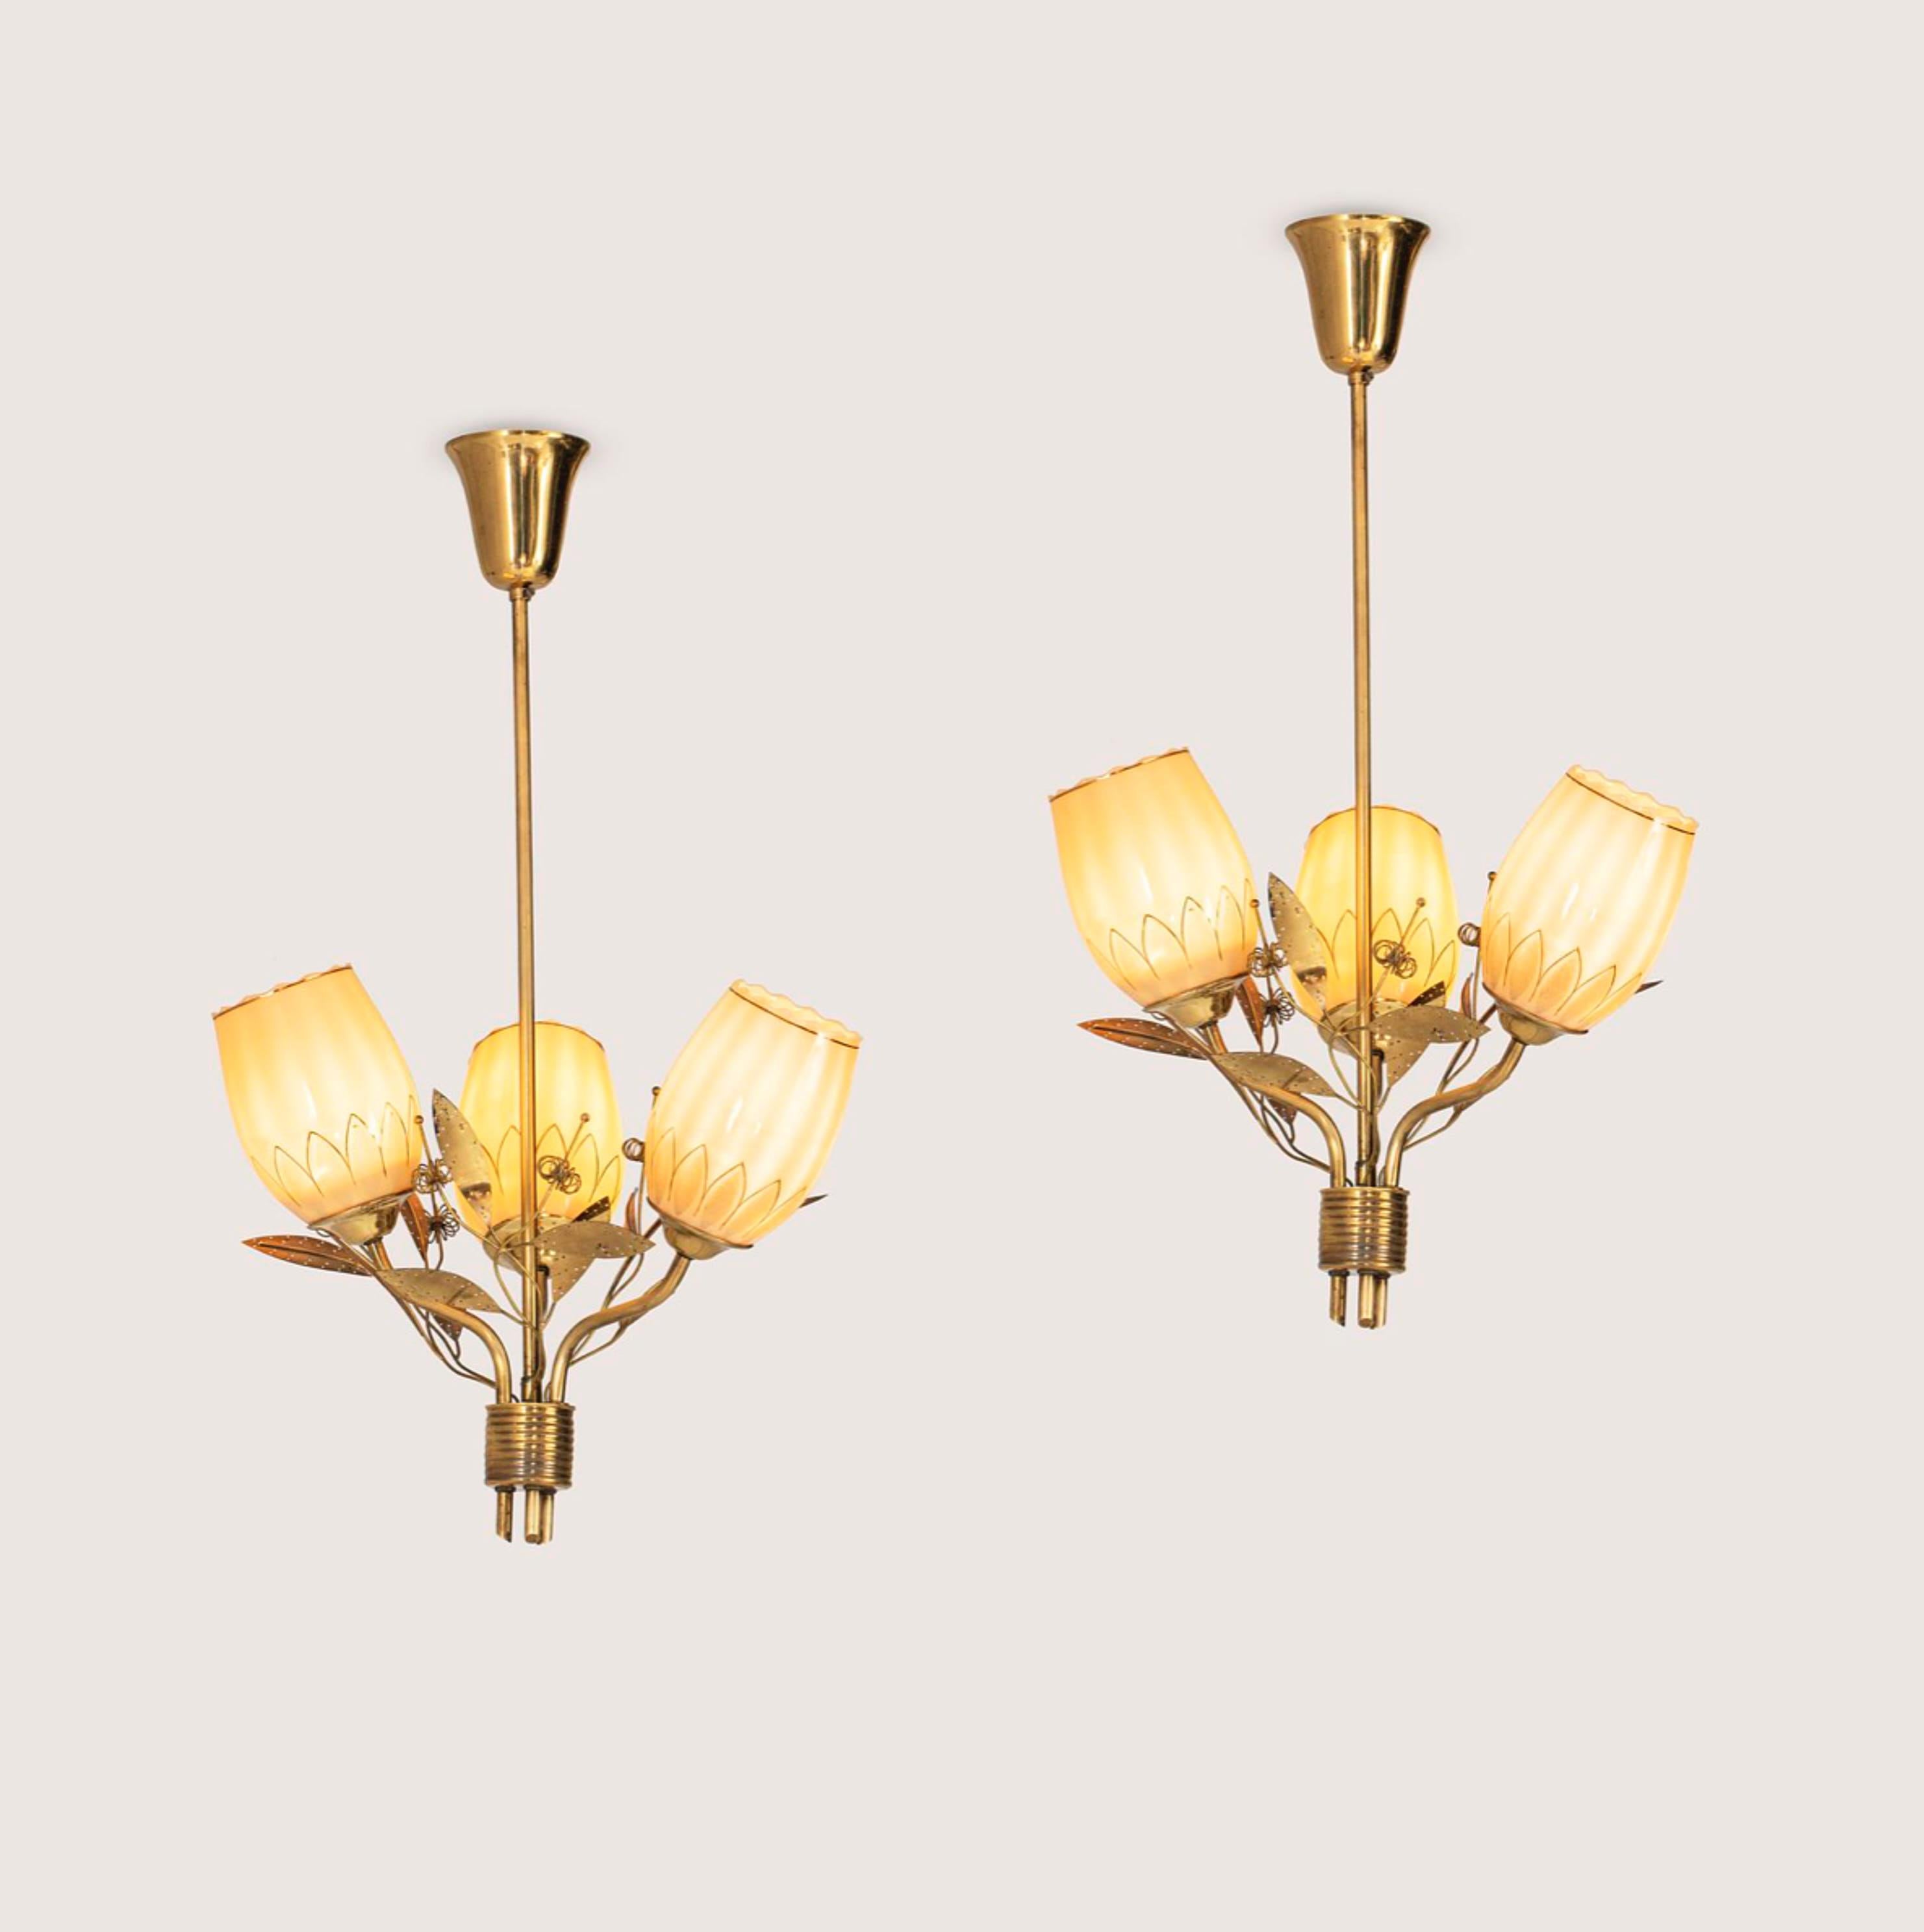 Rare Pair of Itsu chandeliers / Pendant Ceiling Lights, Finland, 1950s. Very good vintage condition. Local re-wiring recommended prior to use. Priced per unit. Currently 2 available. Ships worldwide.

Measures: Height: 70cm
Diameter: 48cm.



